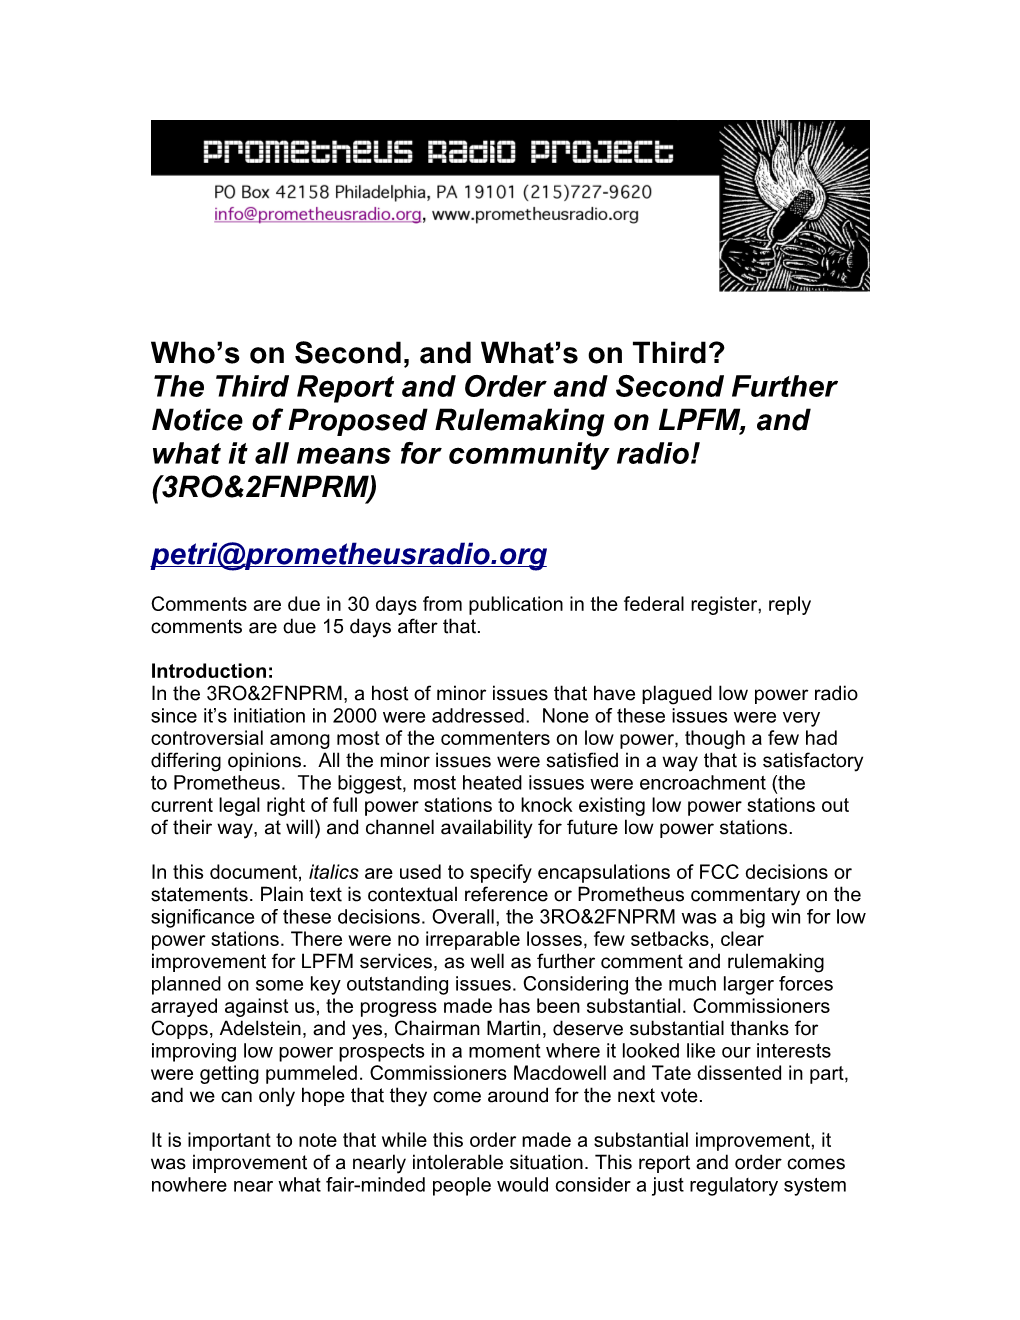 Who S on Second, and What S on Third? LPFM Rulemaking Analysis, December 13, 2007